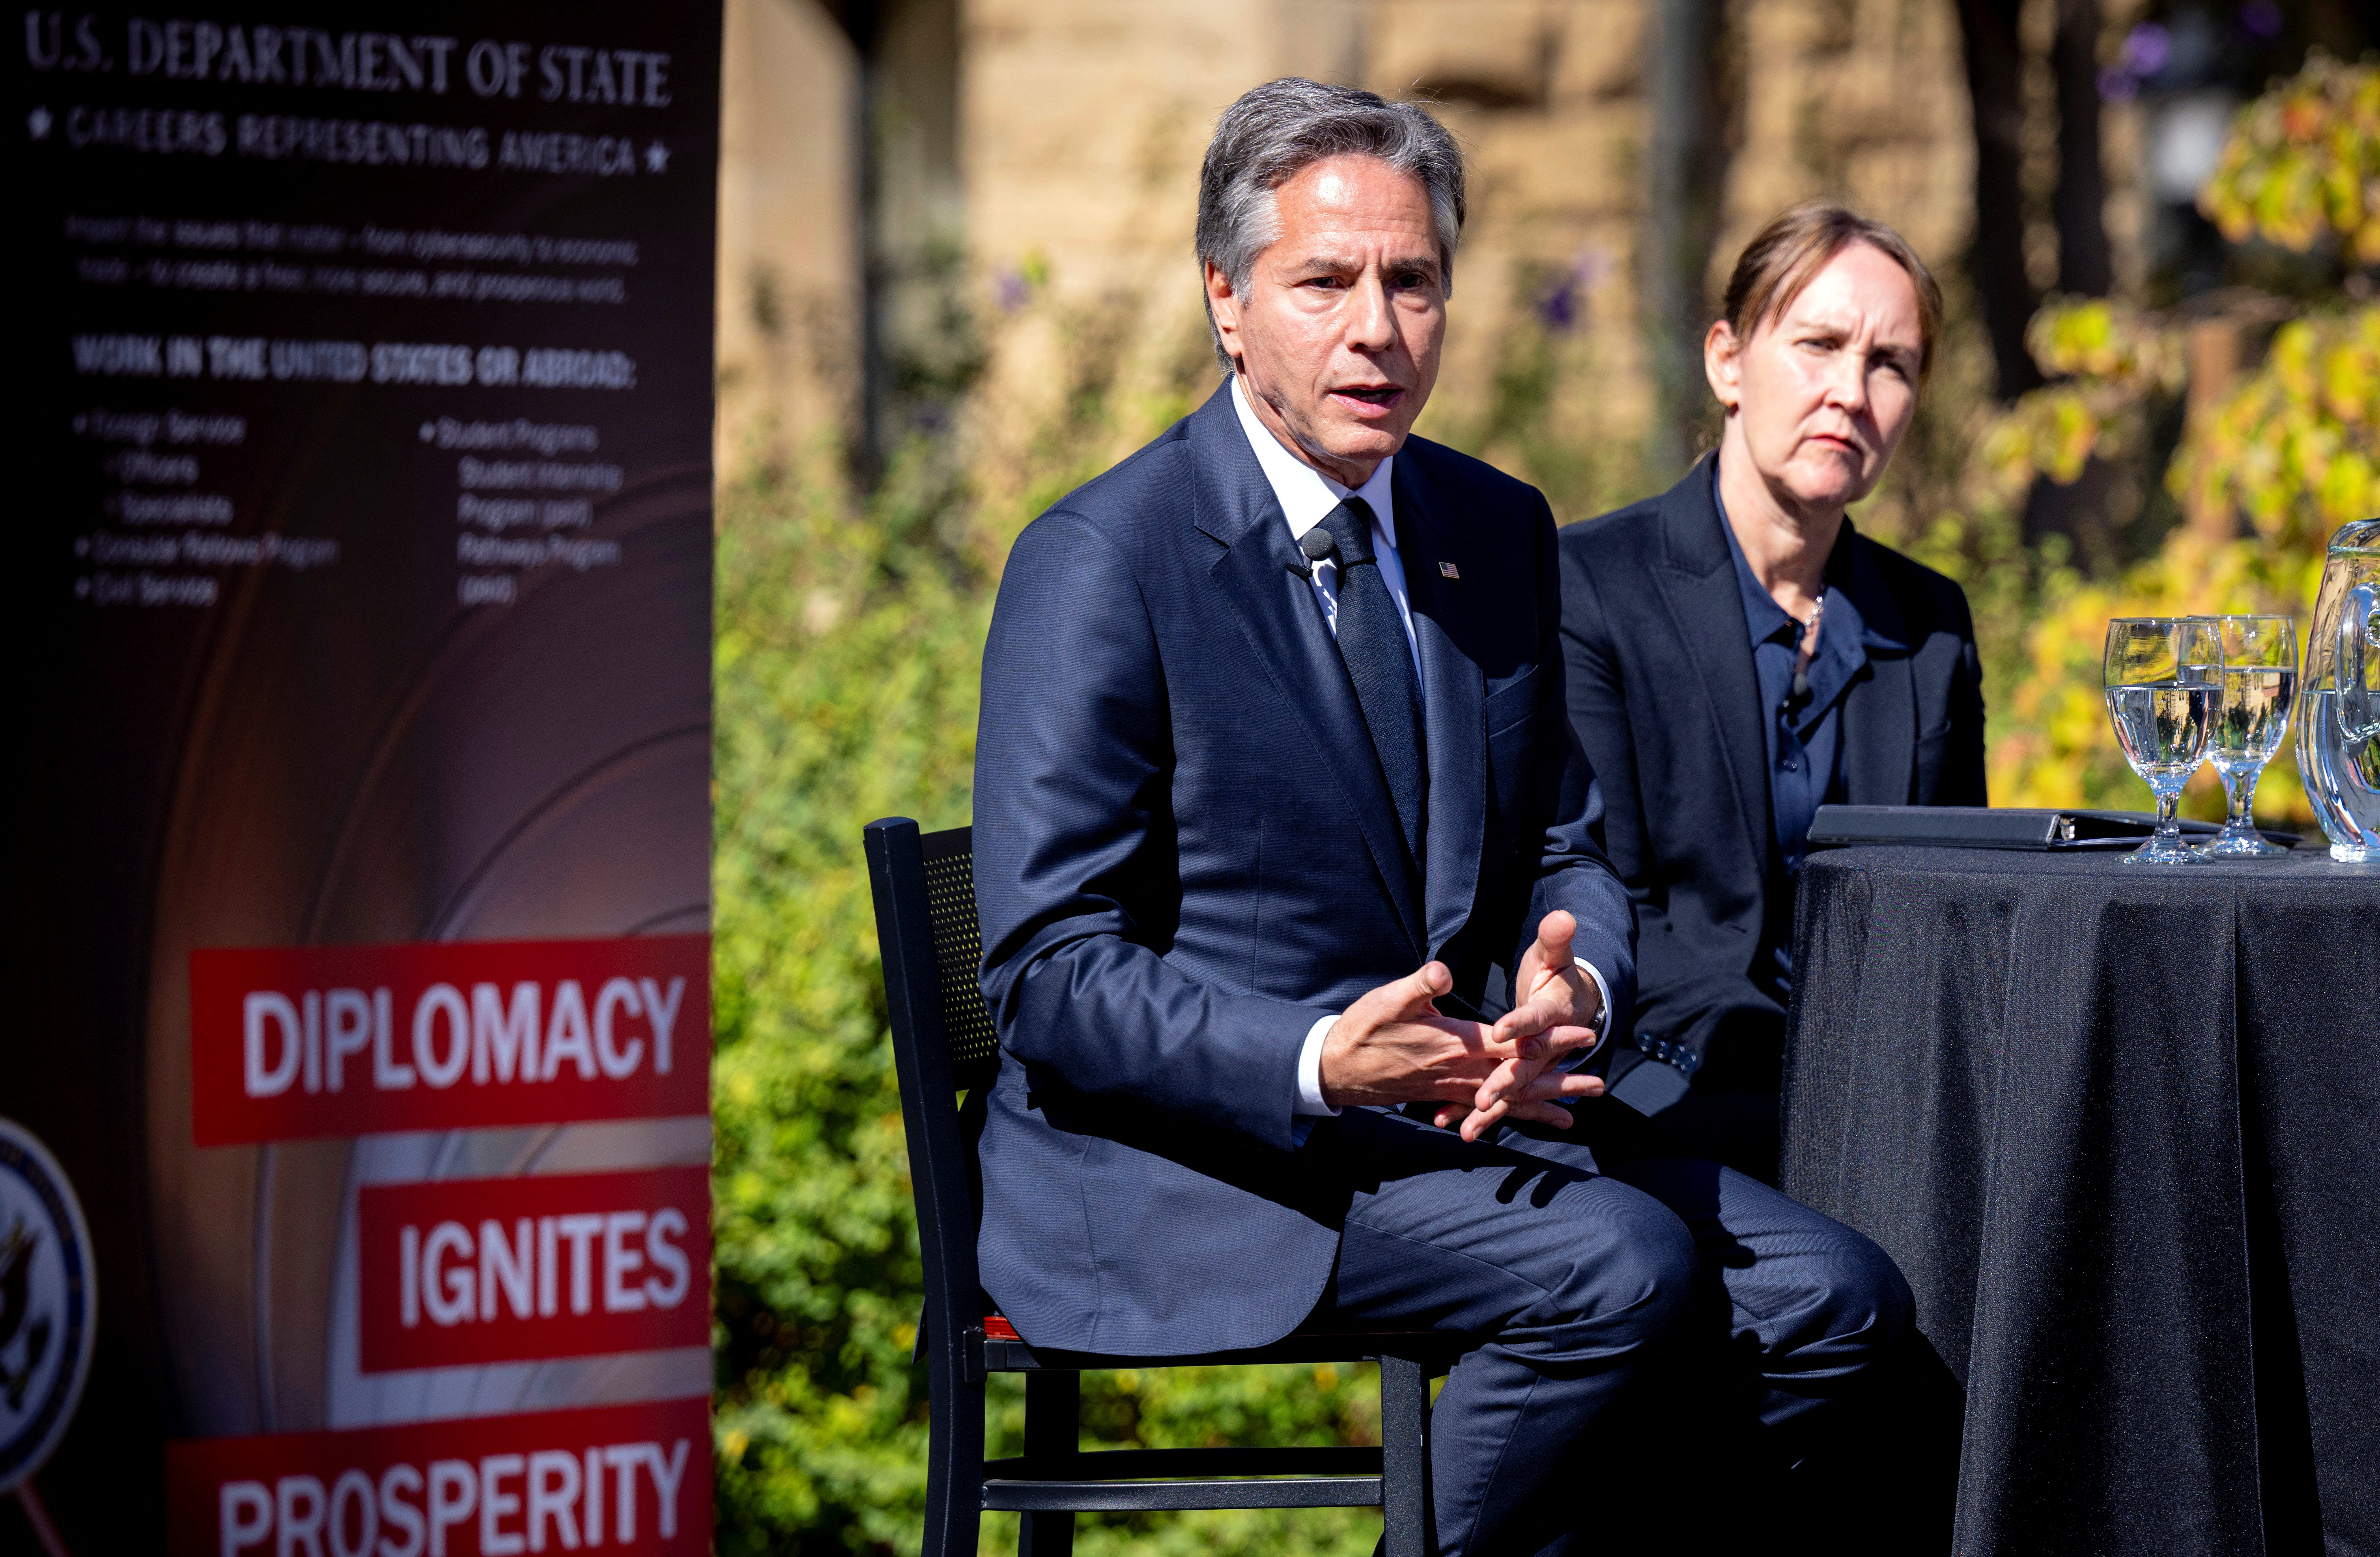 US Secretary of State Antony Blinken (L) delivers remarks during a recruiting event at Stanford Law School in Stanford, California